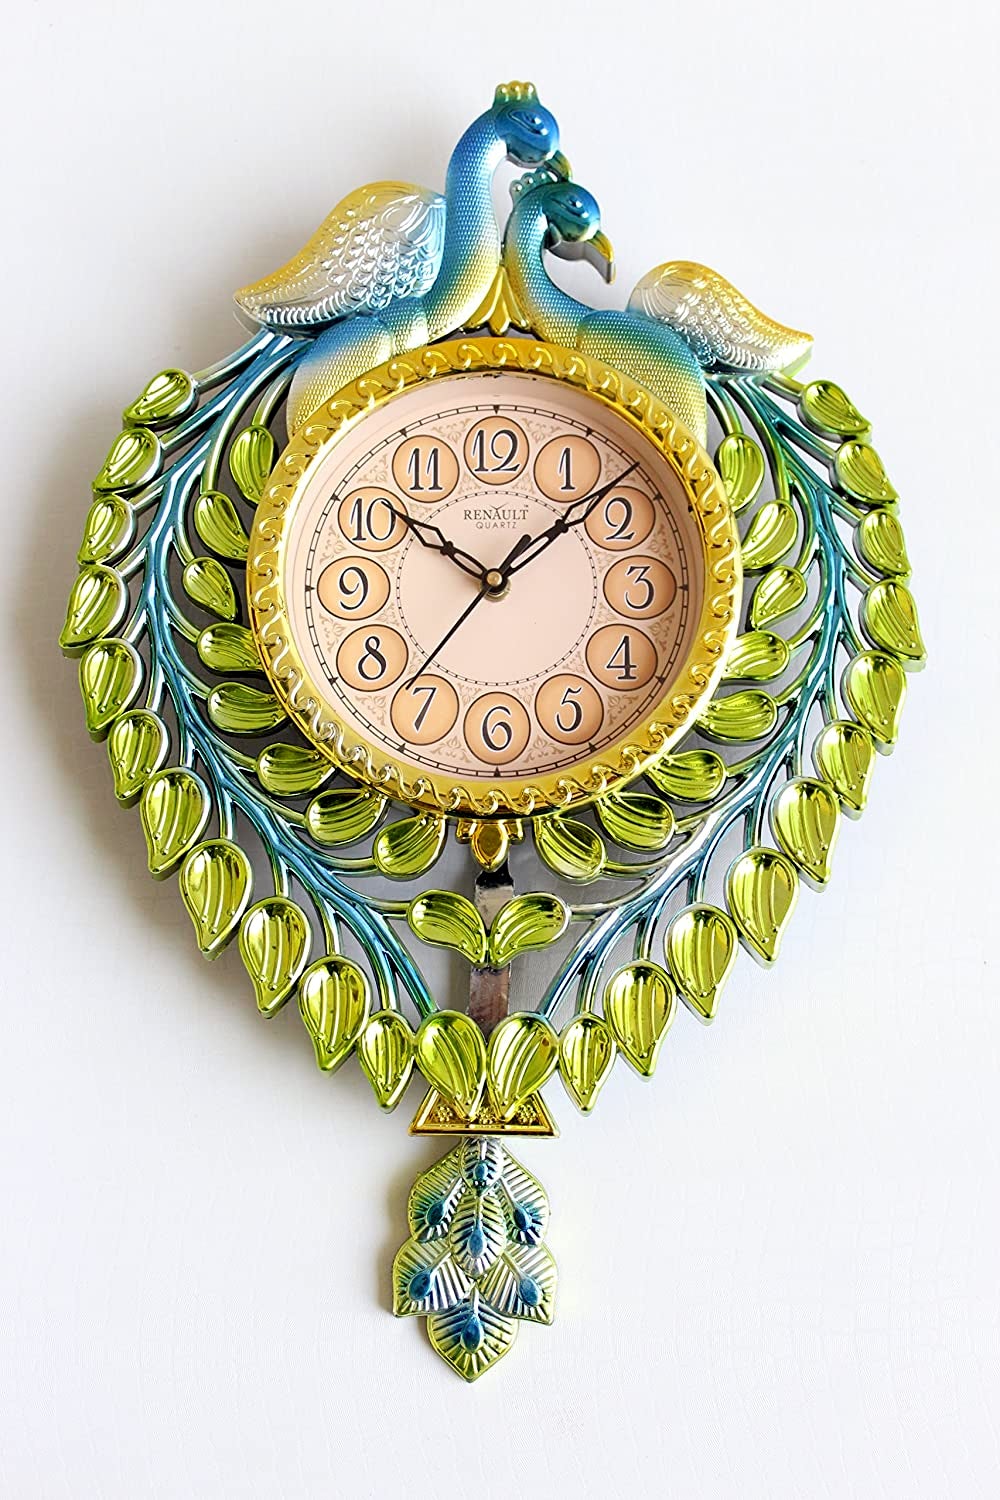 FunkyTradition Multicolored Green Peacock Pendulum Wall Clock, Wall Watch, Wall Decor for Home Office Decor and Gifts 42 cm Tall